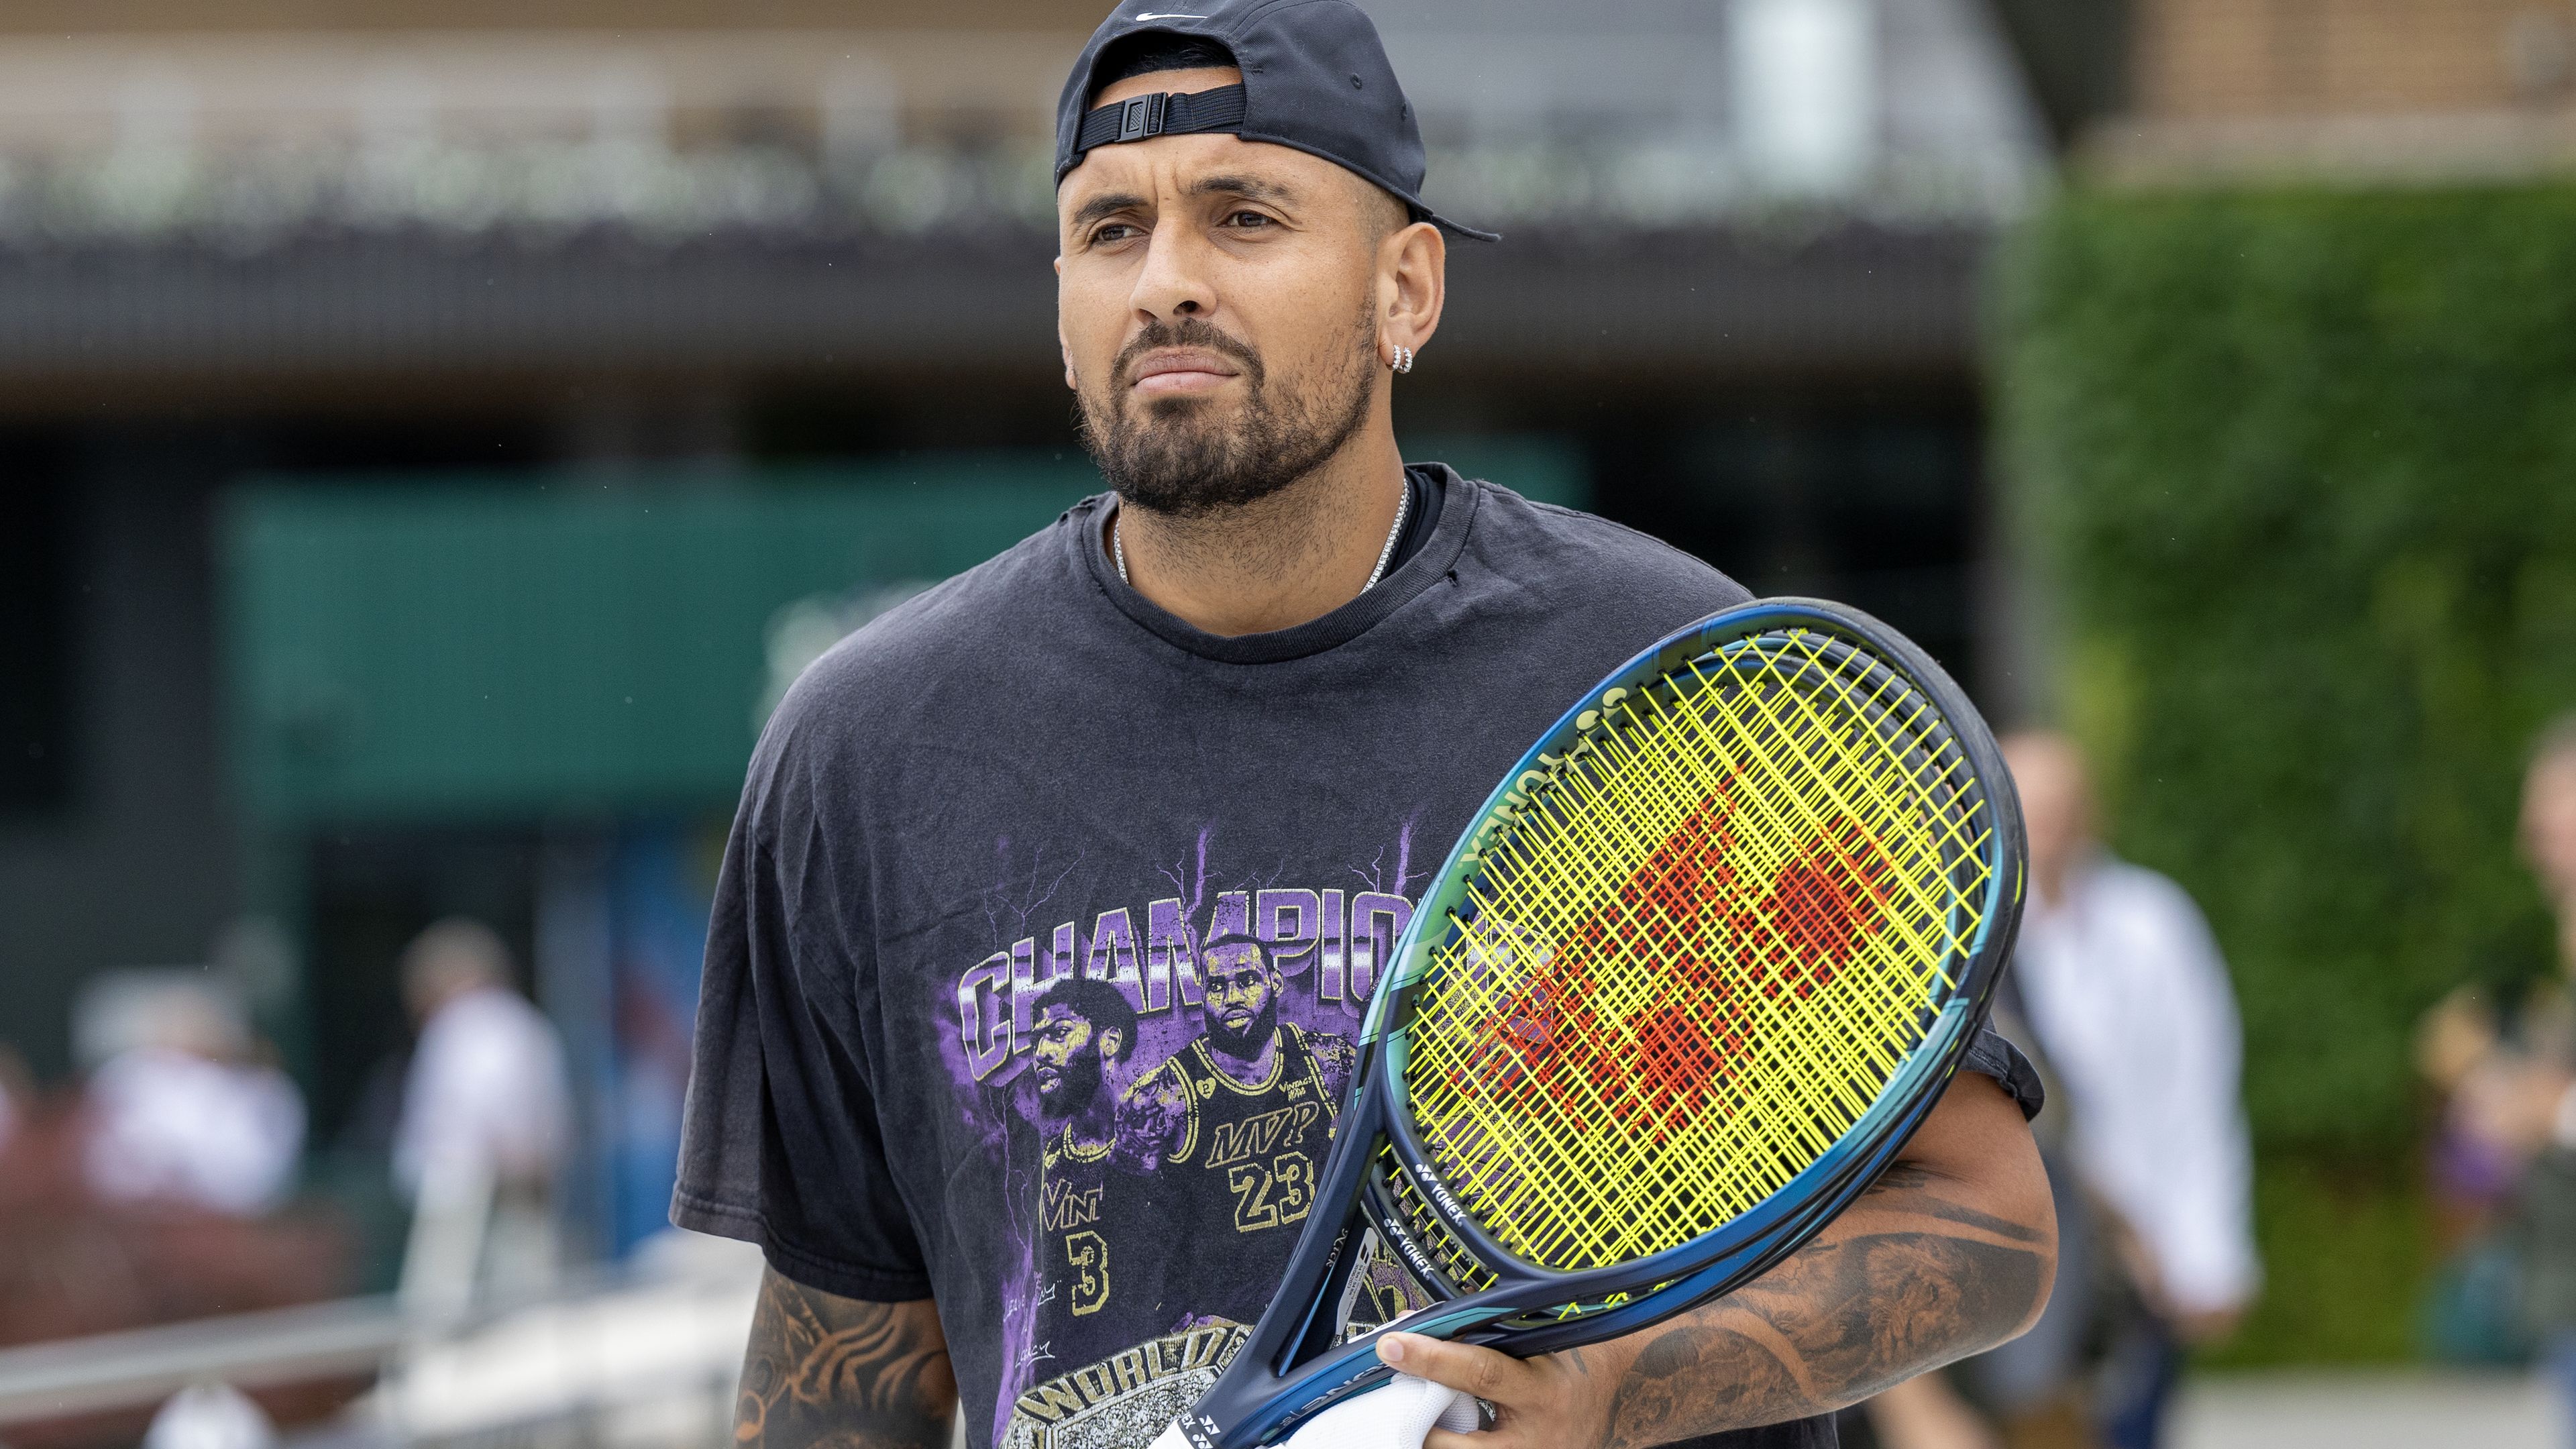 Aussie tennis star Nick Kyrgios admits career 'may be over' but says 'I'm OK with that'